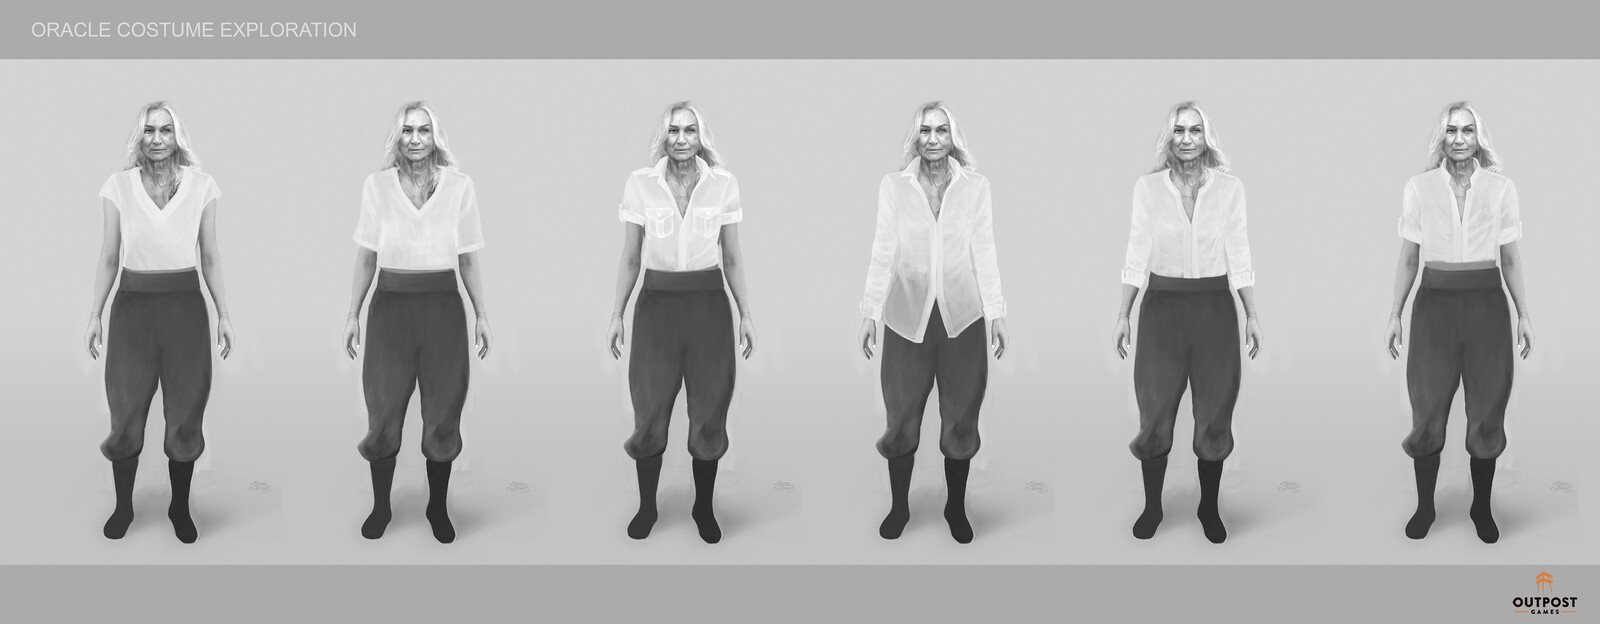 Oracle - Costume Part System Design (Shirts)